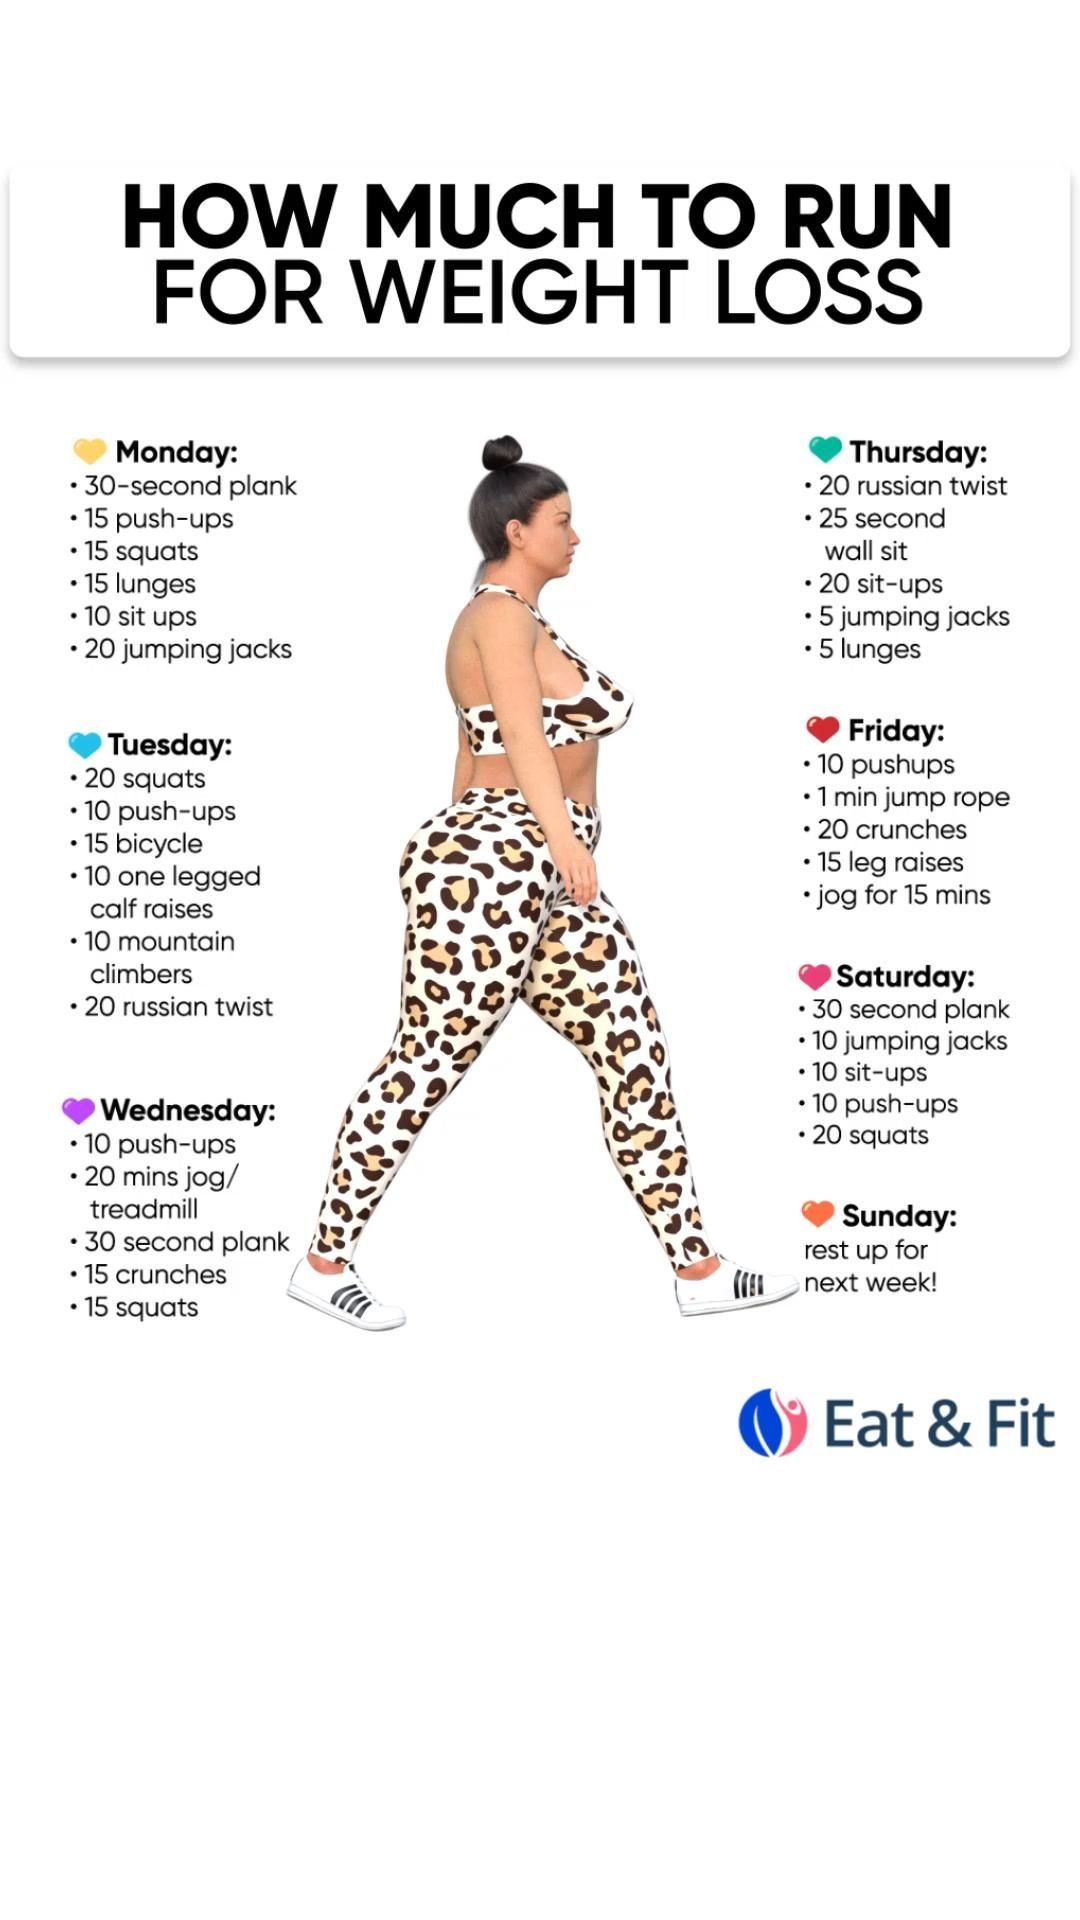 ??Lose Weight at Home. Get a personal meal plan.? - ??Lose Weight at Home. Get a personal meal plan.? -   16 fitness Routine weekly ideas